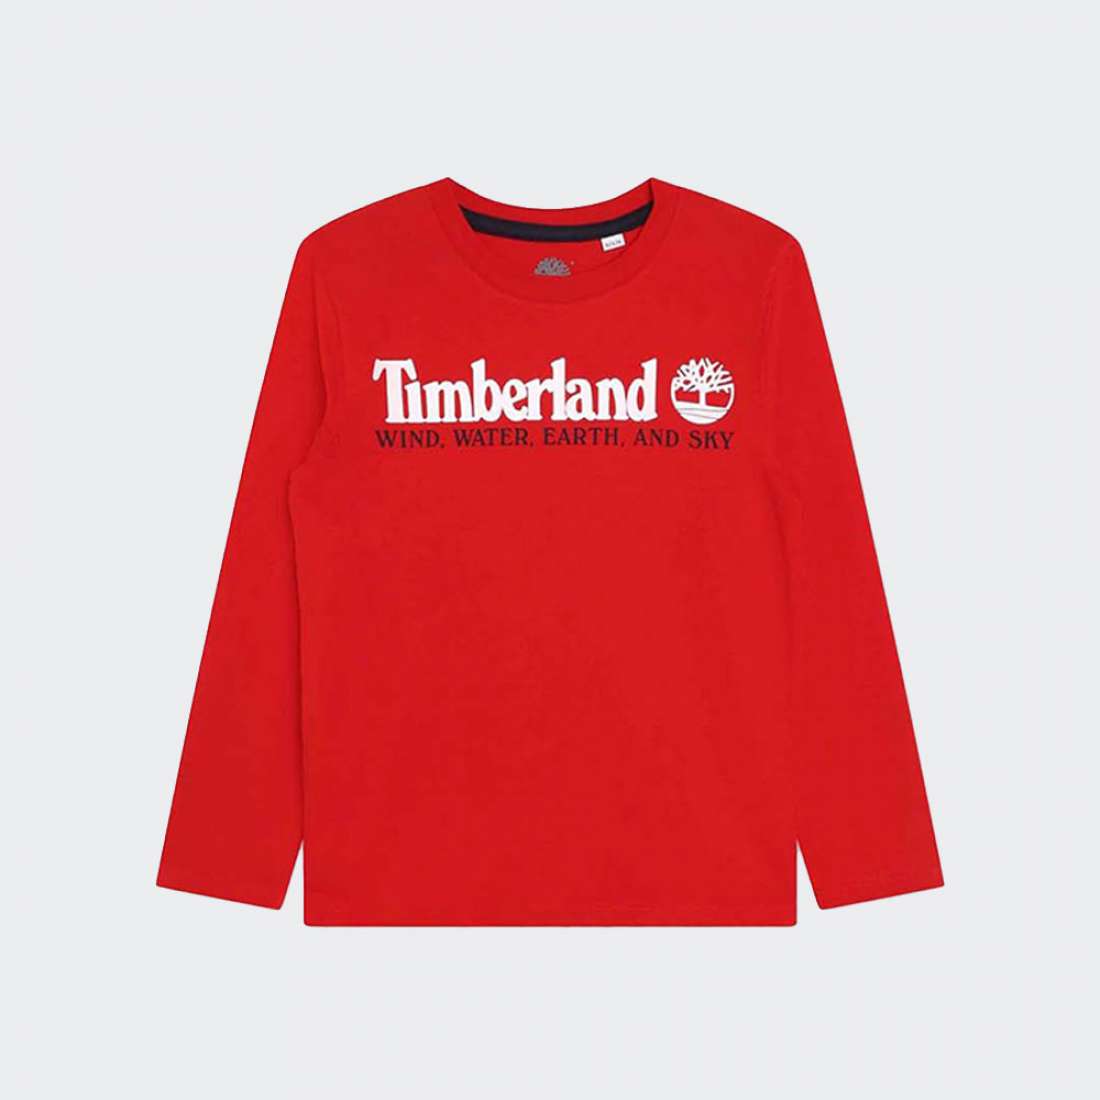 LONGSLEEVE TIMBERLAND Y WIND, WATER, EARTH AND SKY RED